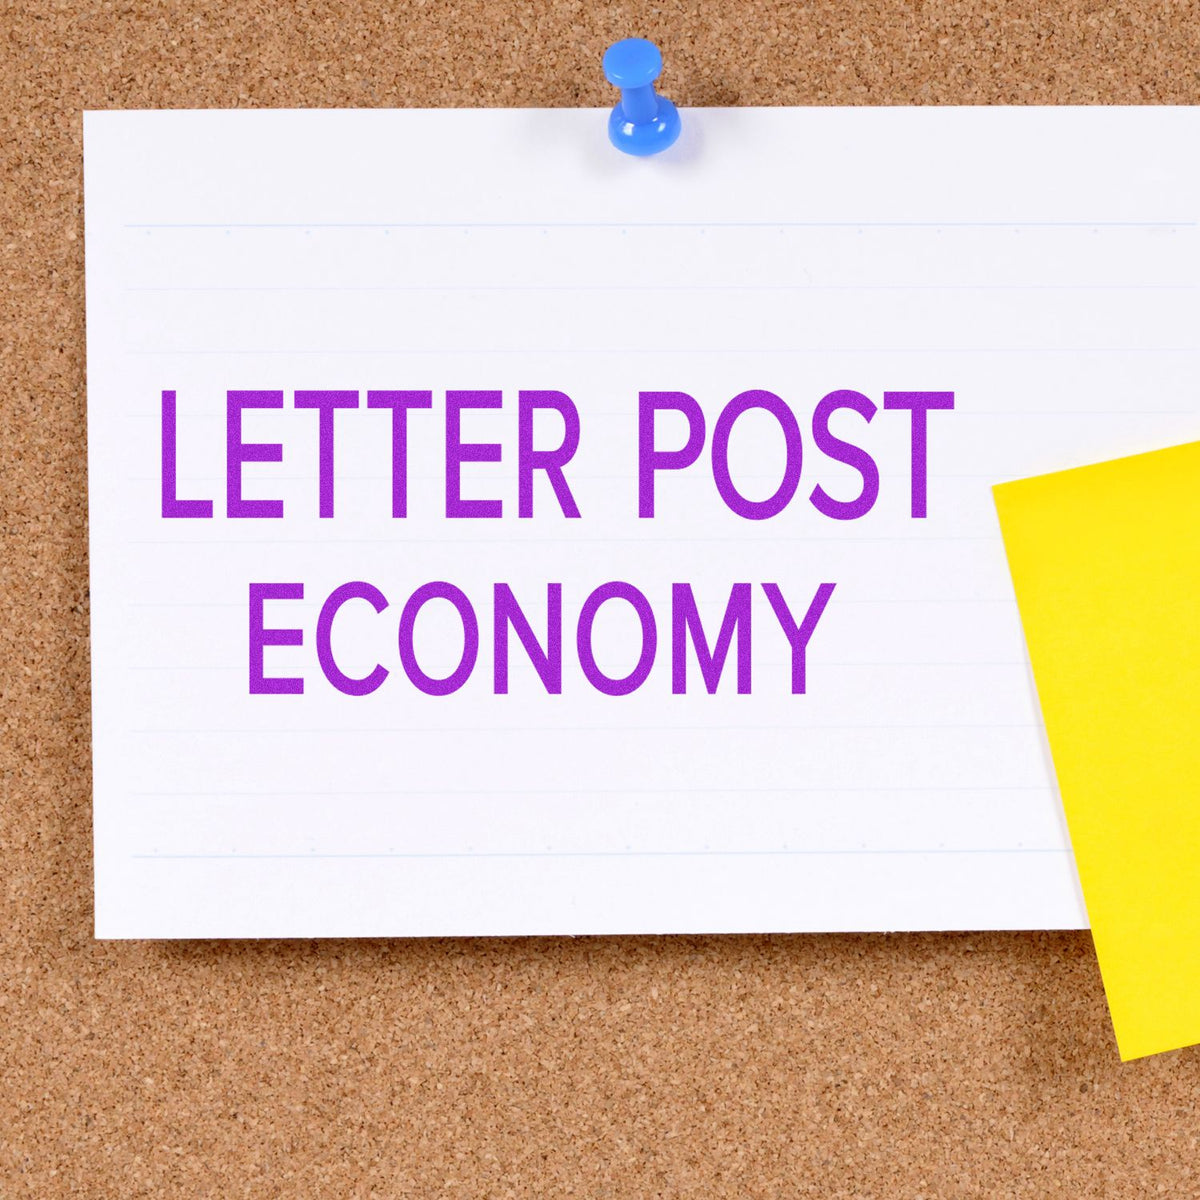 Large Pre-Inked Letter Post Economy Stamp In Use